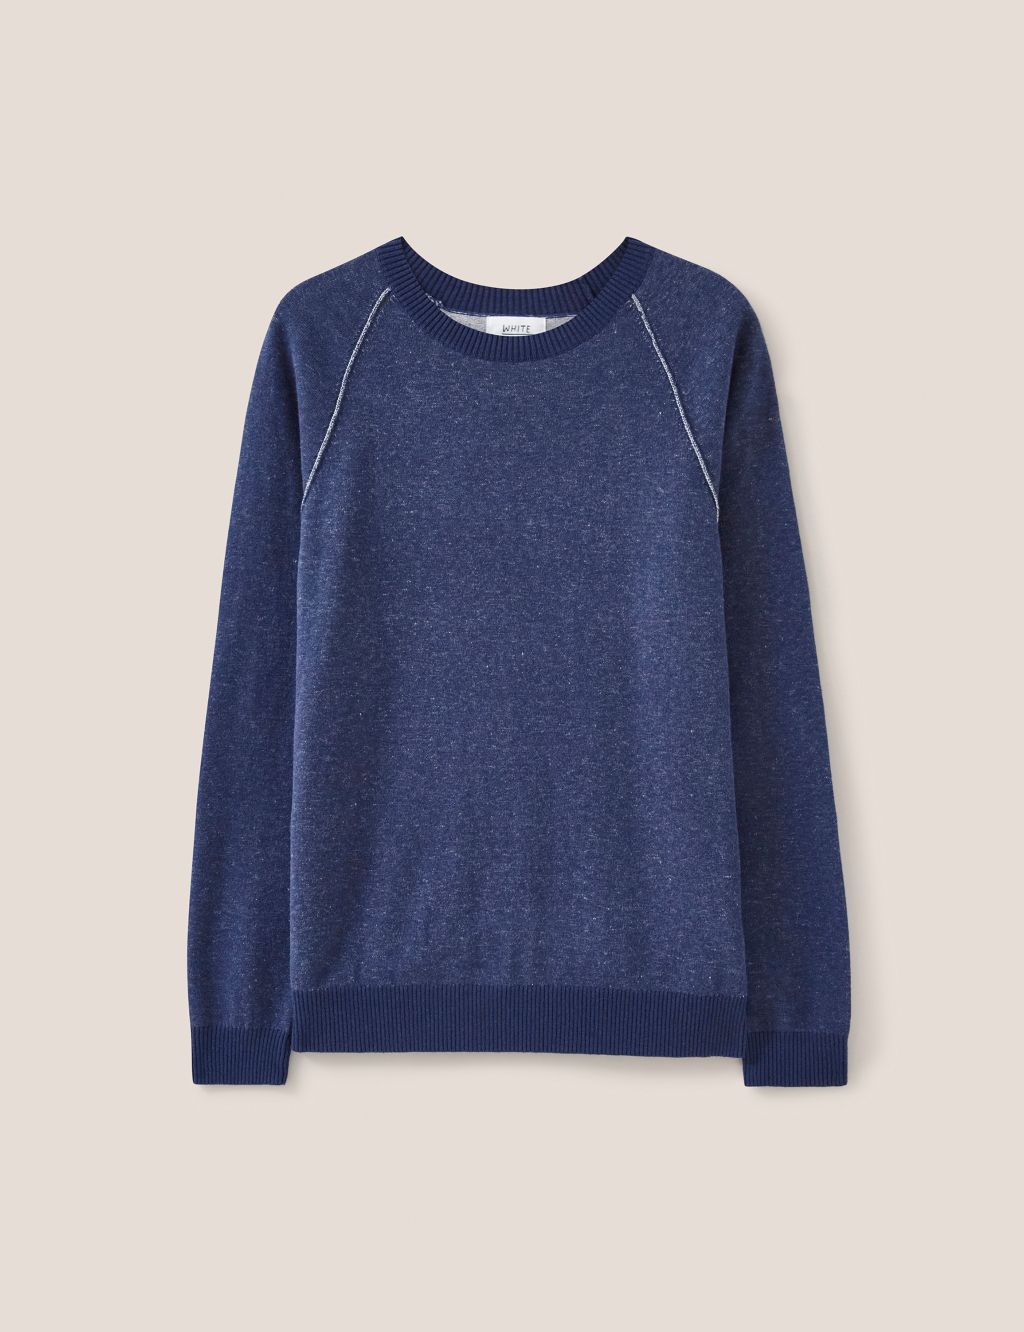 Cotton Rich Crew Neck Jumper with Wool image 2